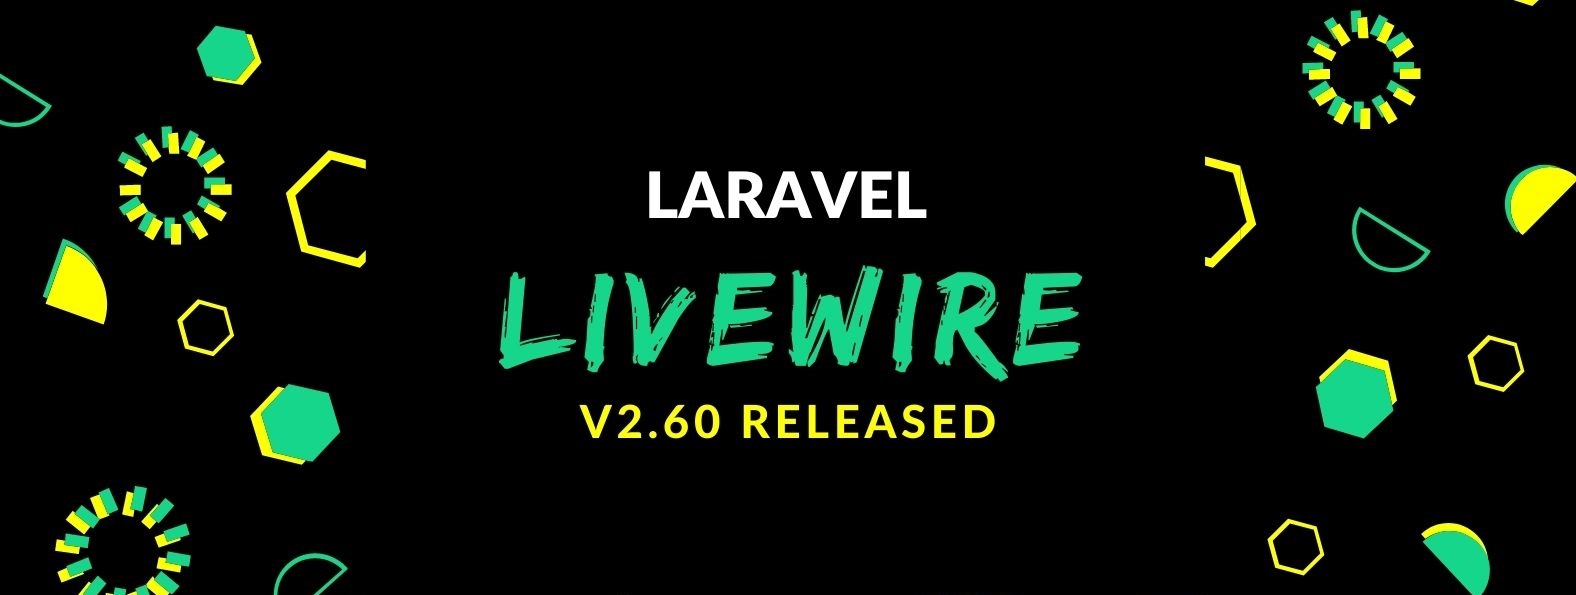 What's new in Laravel Livewire v2.6 | Livewire v2.6 Released